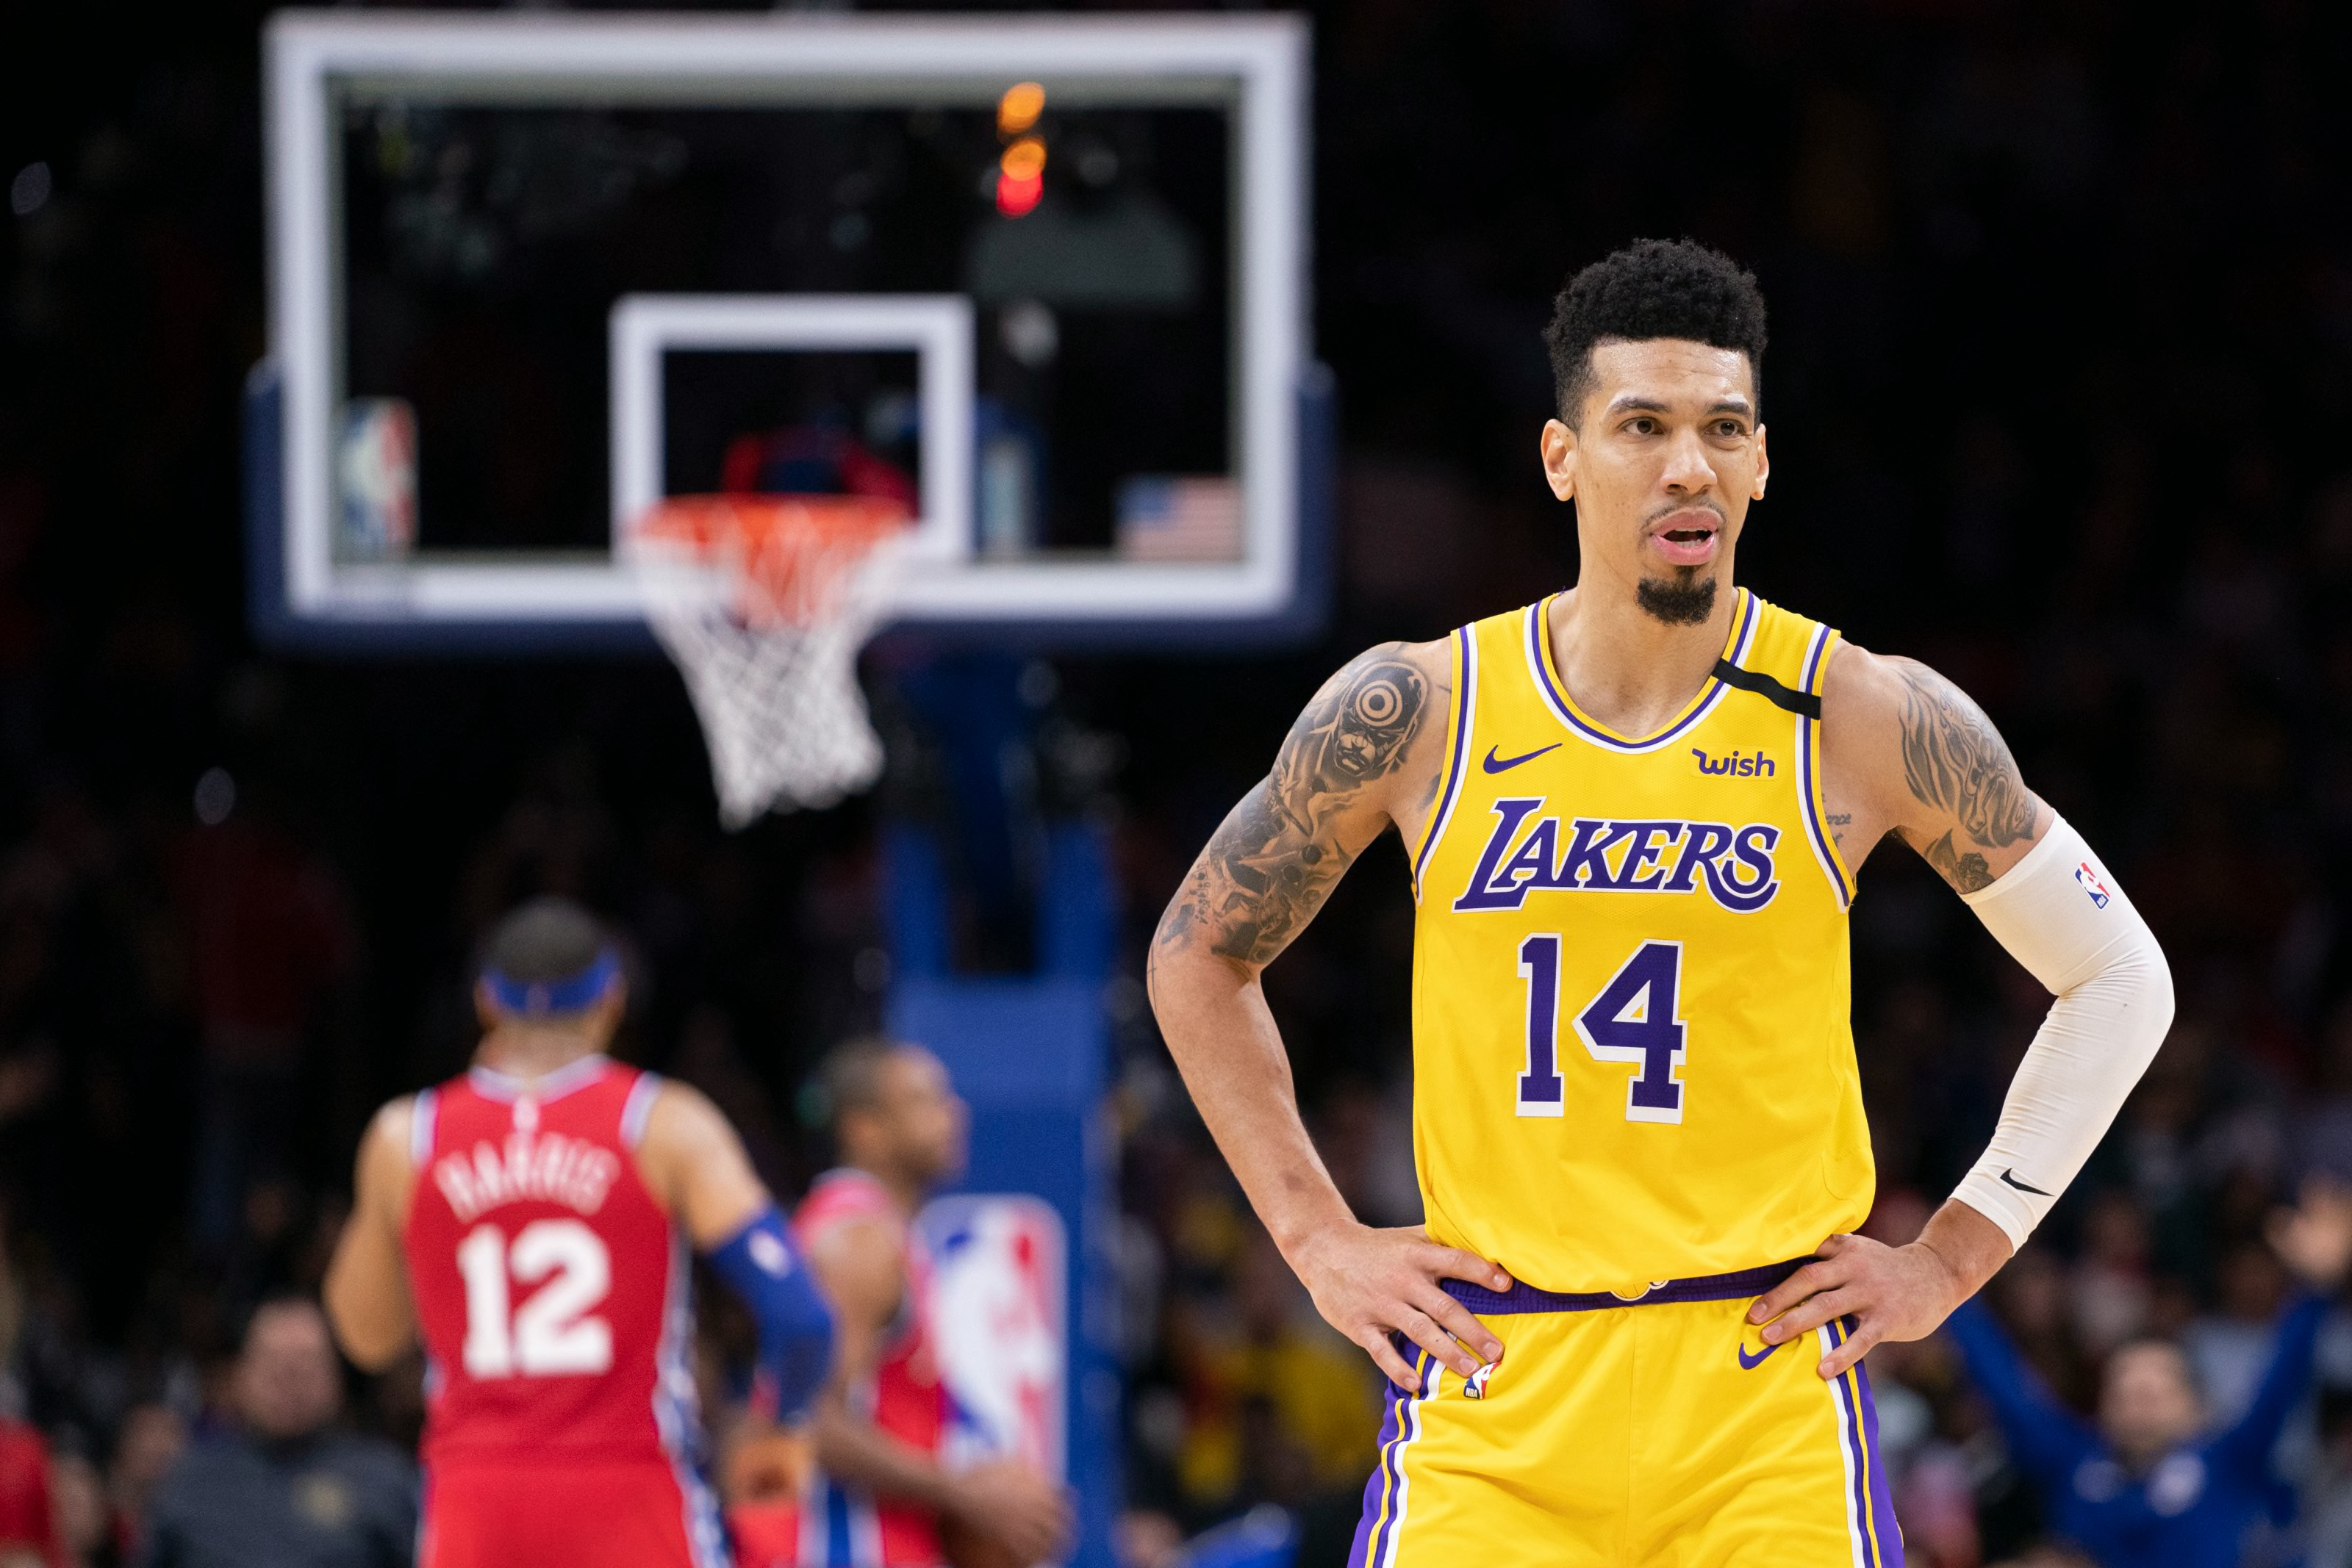 Sixers beat Lakers 109-101 thanks to Danny Green's 28 - Liberty